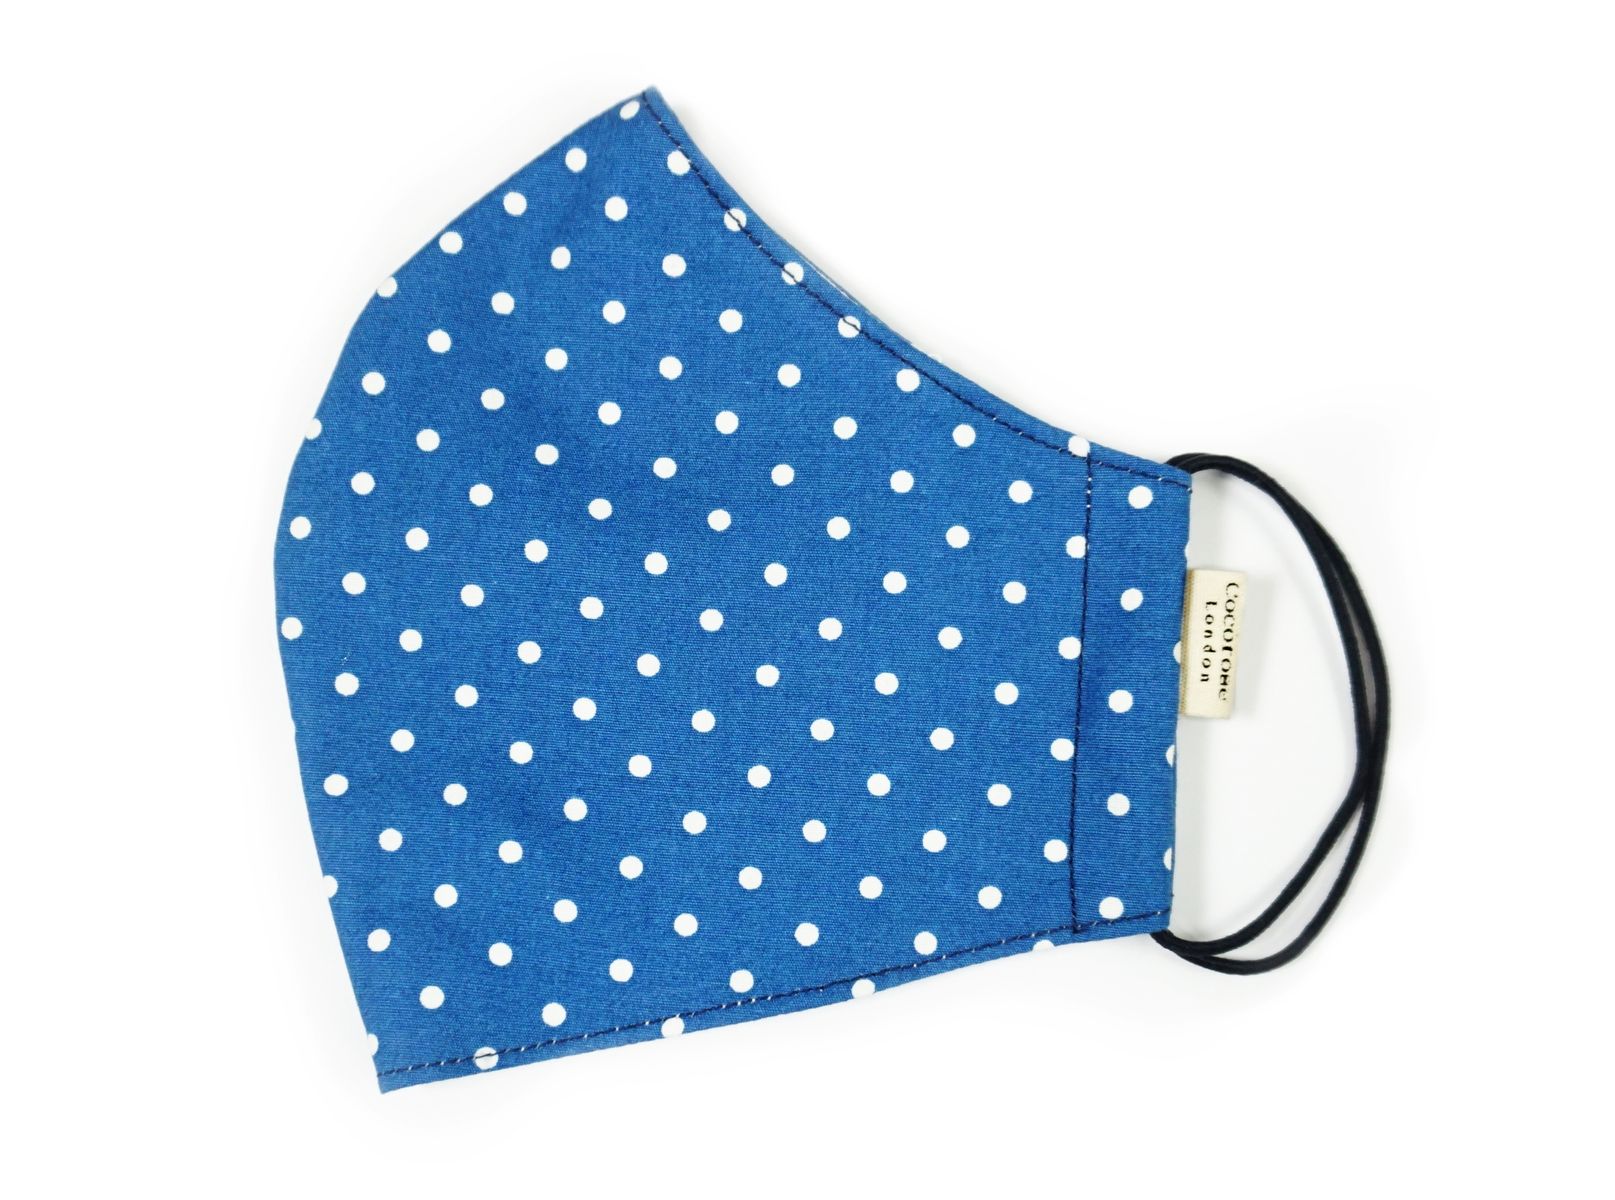 Blue polka dot cotton face mask from Cocorose London